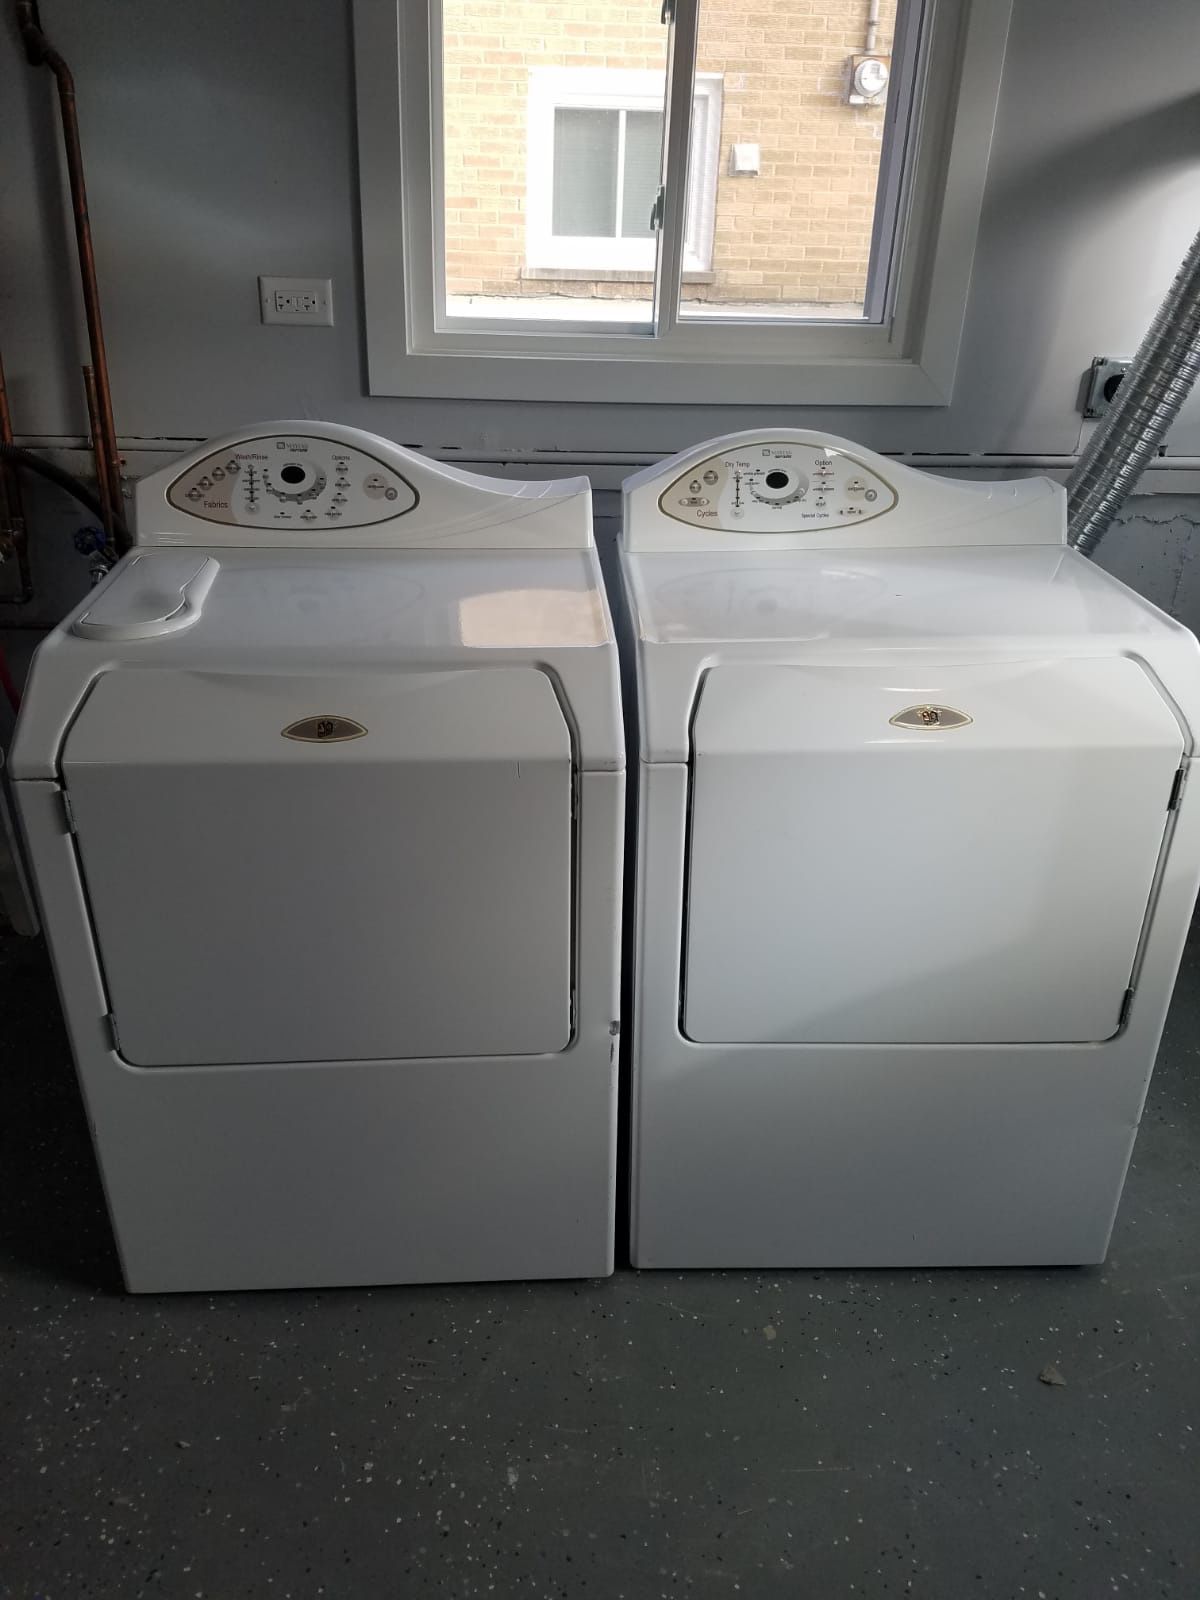 MAYTAG WASHER AND ELECTRIC DRYER